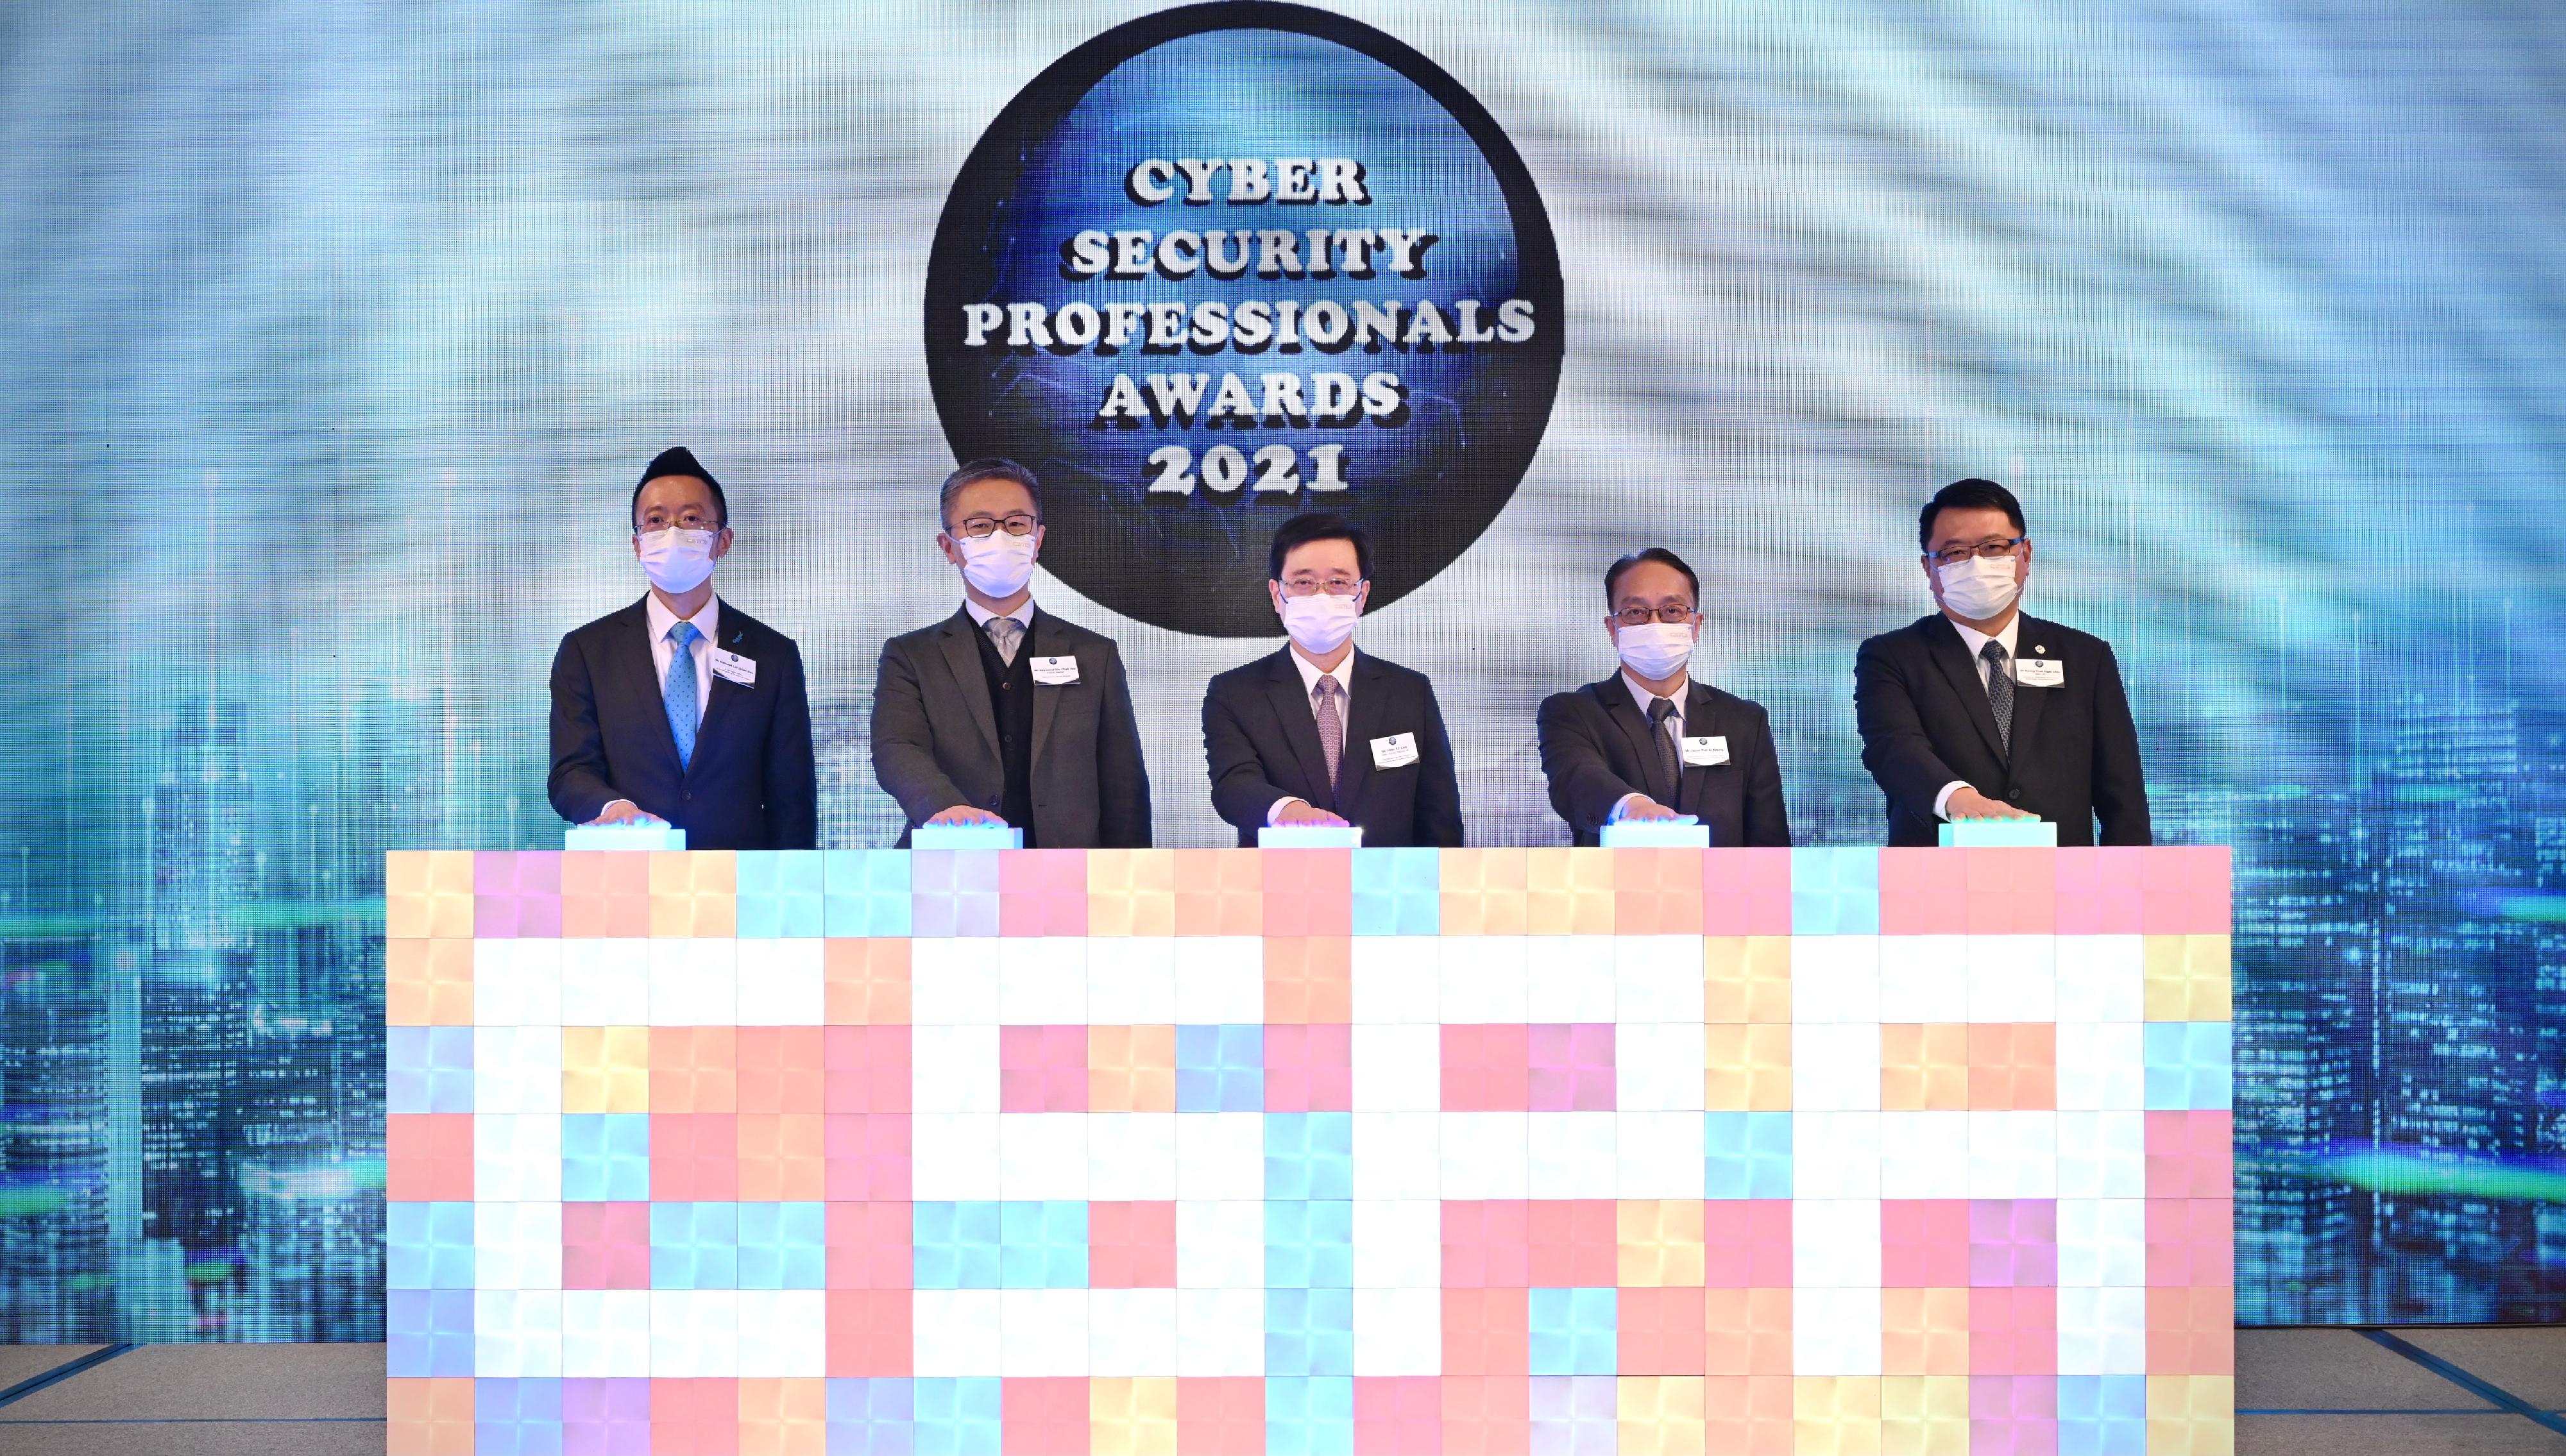 The Chief Secretary for Administration, Mr John Lee, attended the Cyber Security Professionals Awards 2021 presentation ceremony today (December 2). Photo shows (from left) the Chief Digital Officer of the Hong Kong Productivity Council, Mr Edmond Lai; the Commissioner of Police, Mr Siu Chak-yee; Mr Lee; Assistant Government Chief Information Officer (Cyber Security and Digital Identity), Mr Jason Pun; and the Chairman of the Board of Directors of the Hong Kong Science and Technology Parks Corporation, Dr Sunny Chai, officiating at the kick-off ceremony.